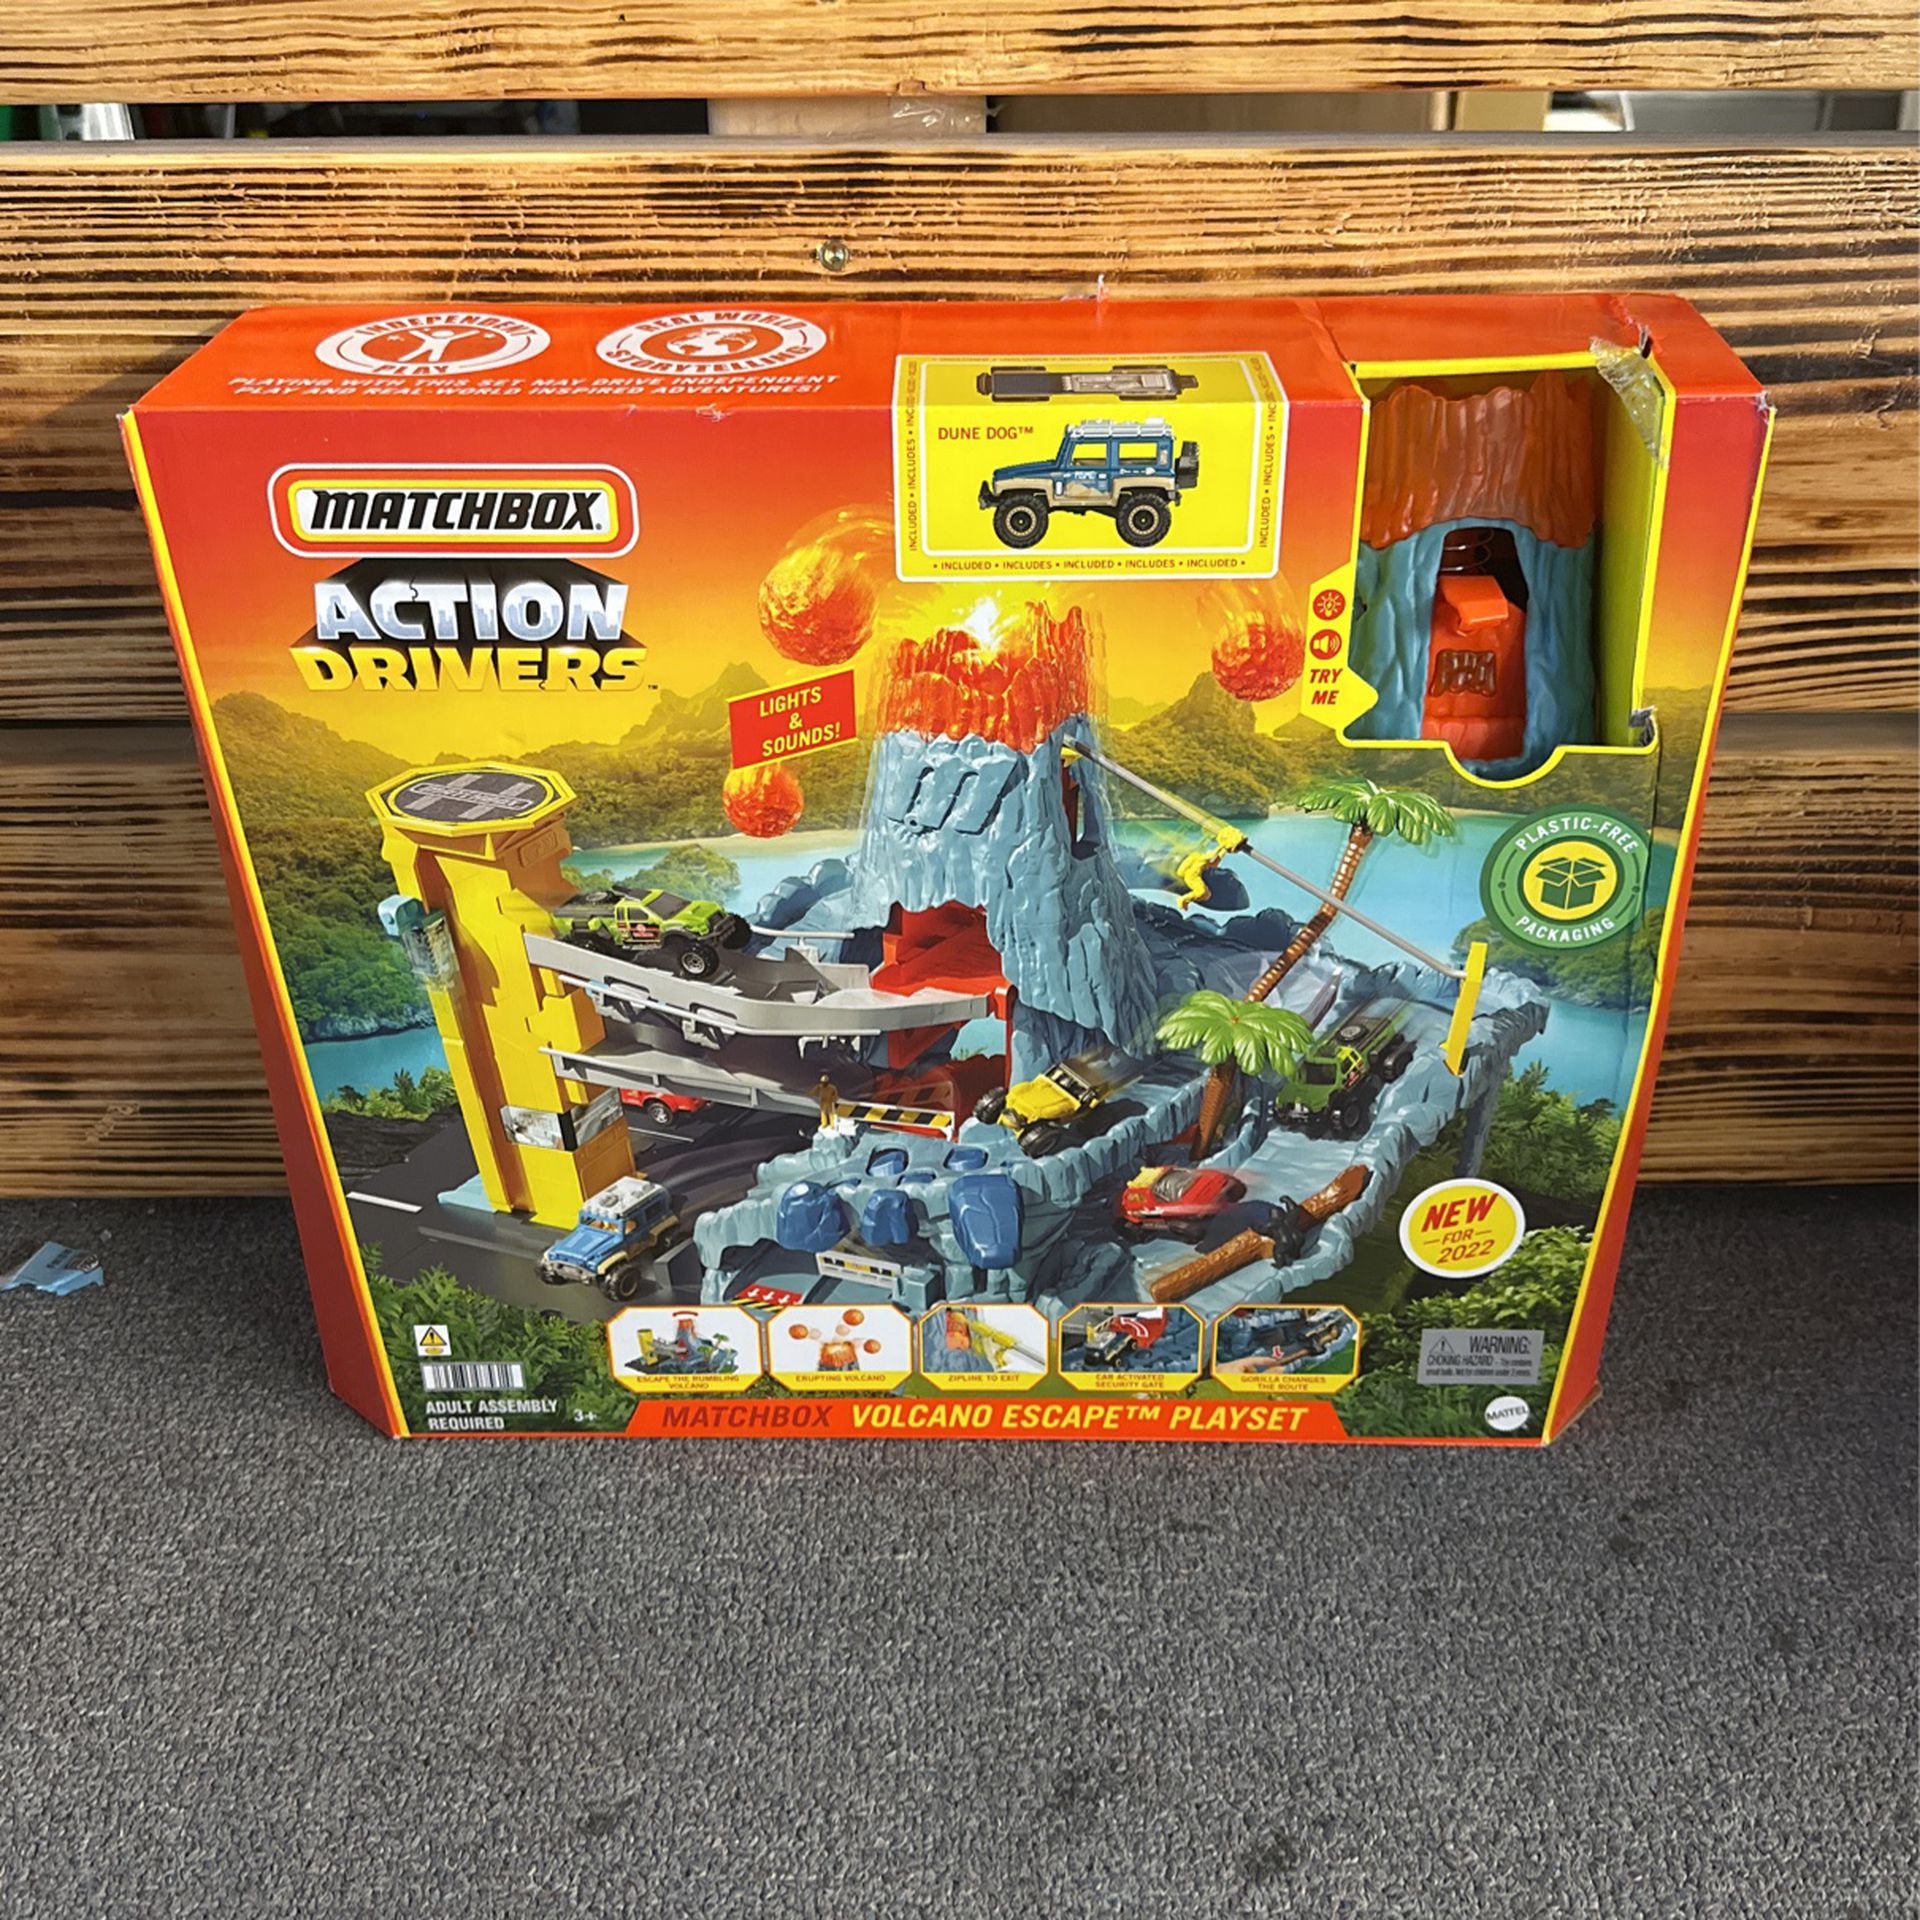 Matchbox Action Drivers Volcano Escape Playset With Sound And Dune Dog Truck